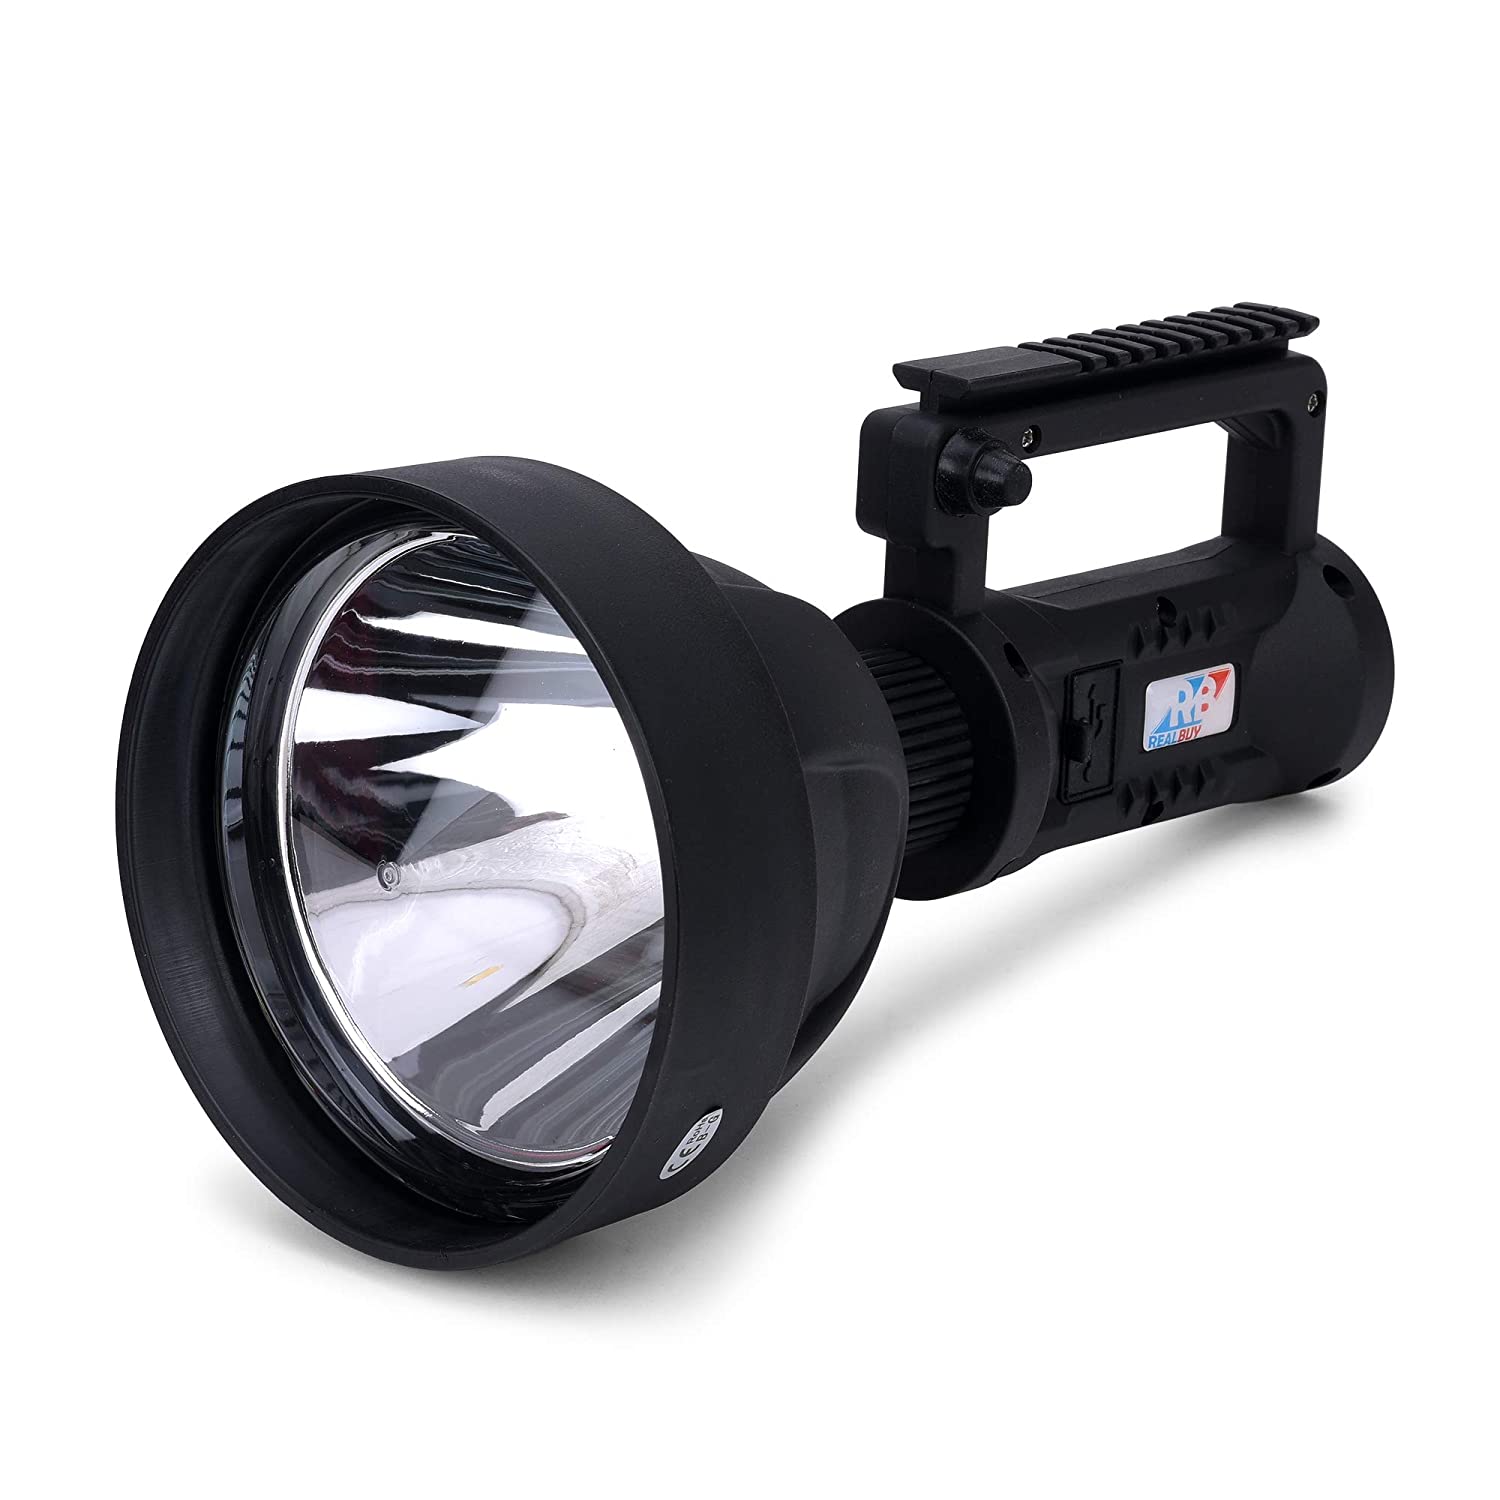 REALBUY LED Search Light 15W with 4000 mAh